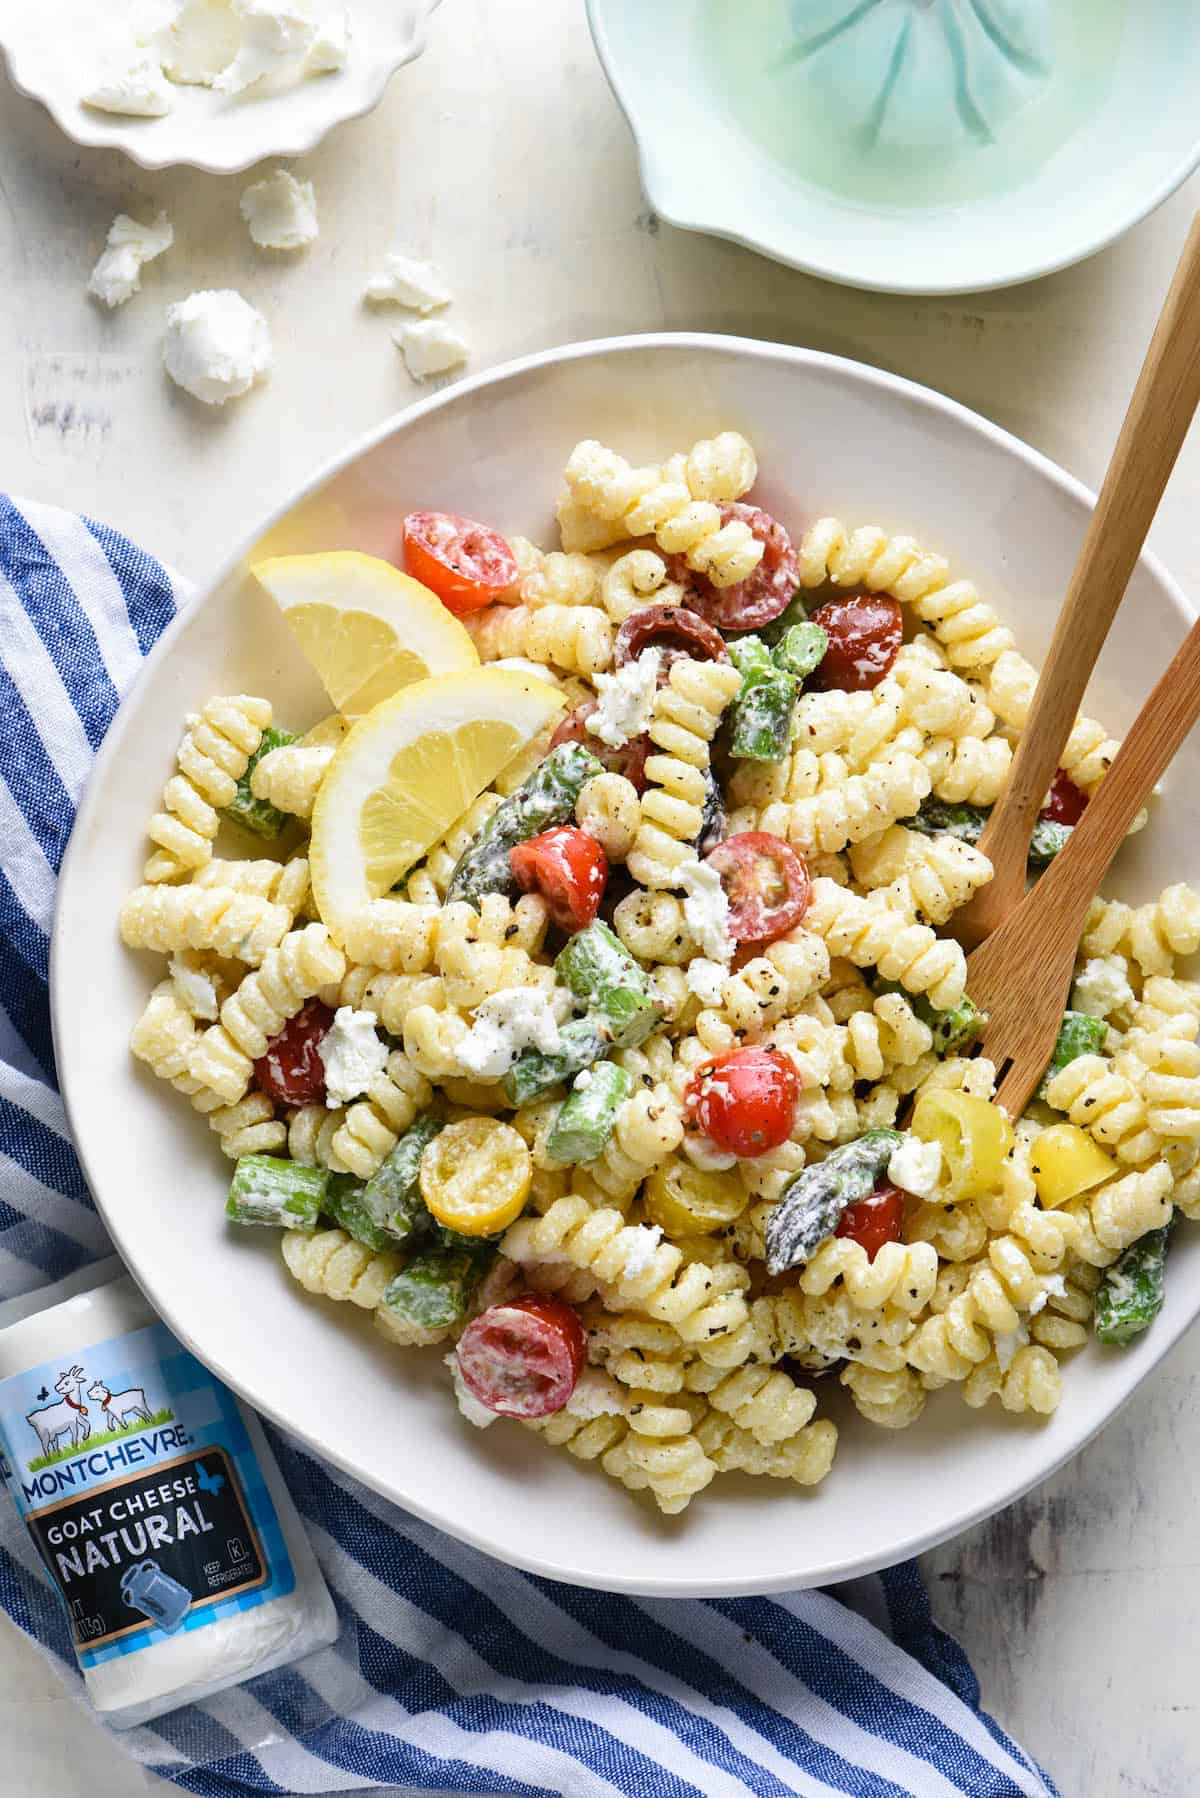 This creamy goat cheese pasta salad is simple to put together and will become a family favorite! Customize with any vegetables you like. | foxeslovelemons.com